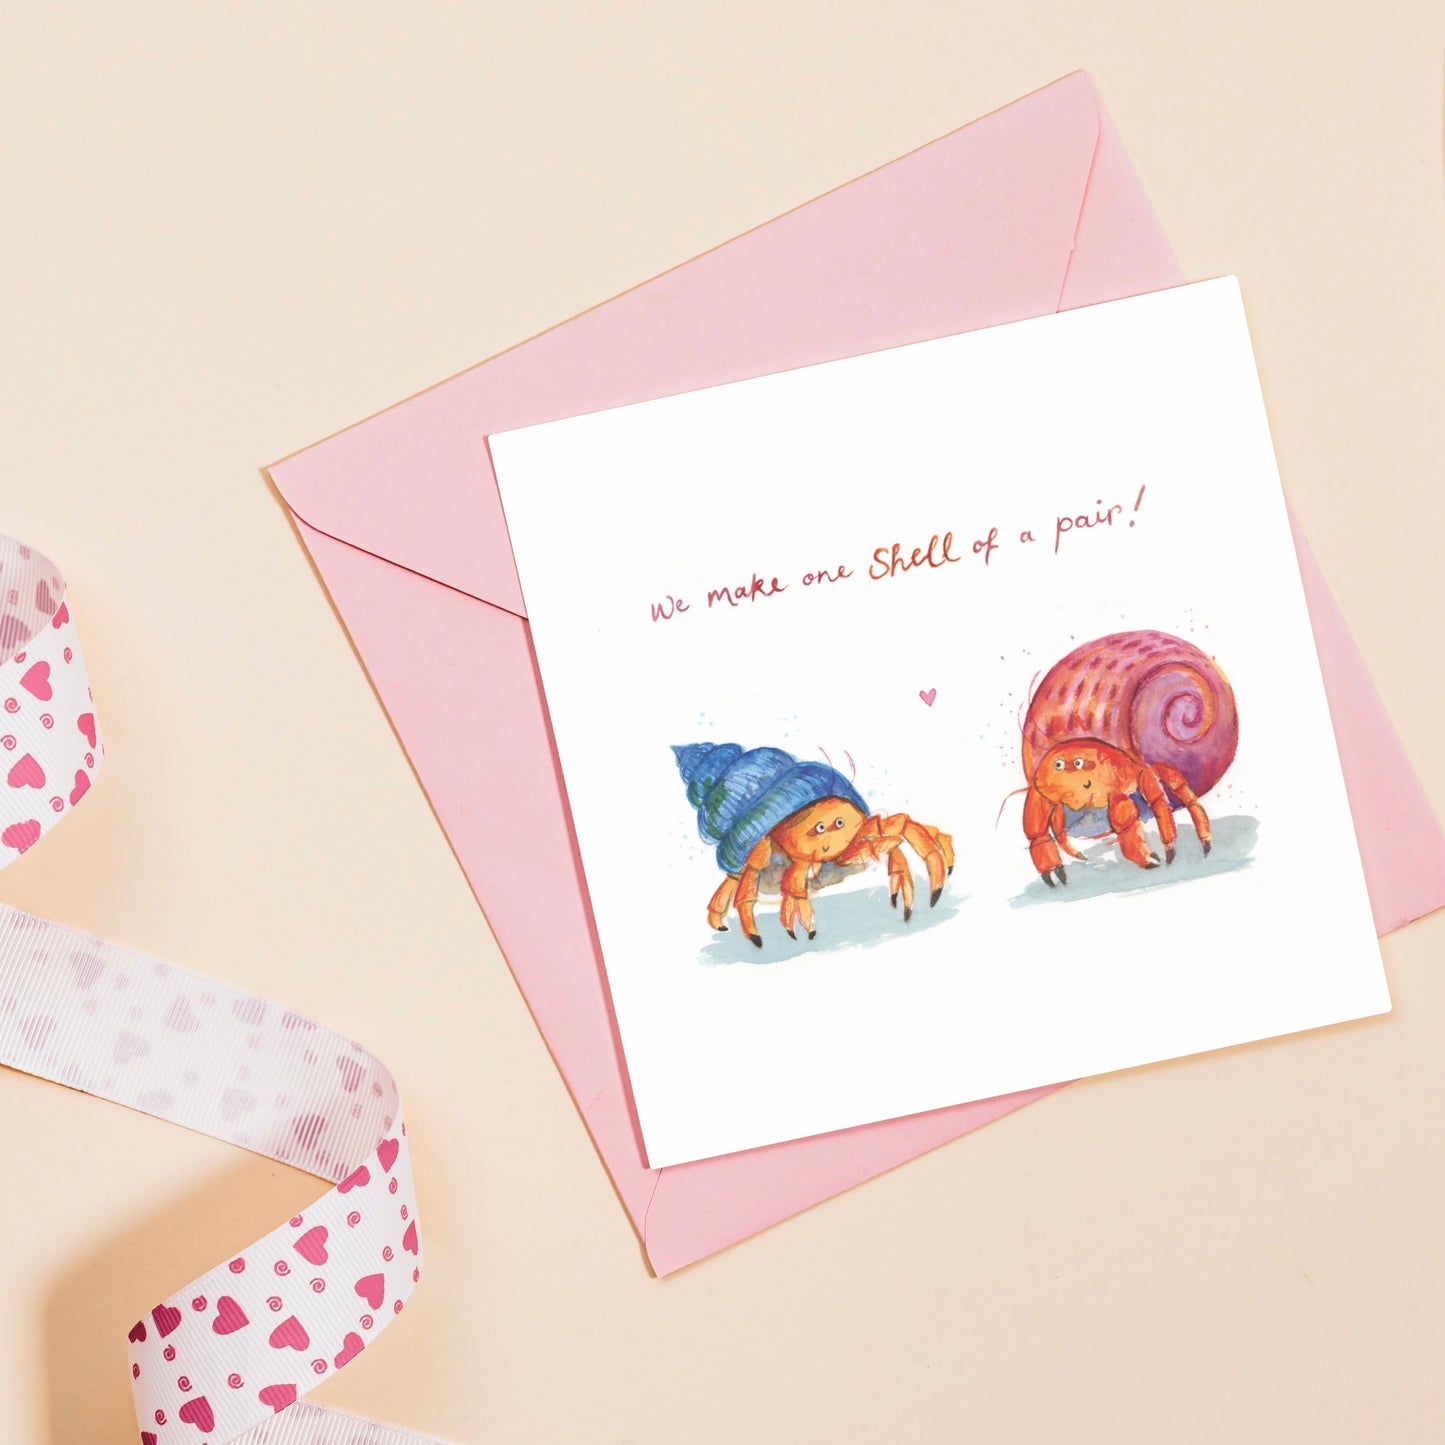 One Shell of a Pair Greetings Card